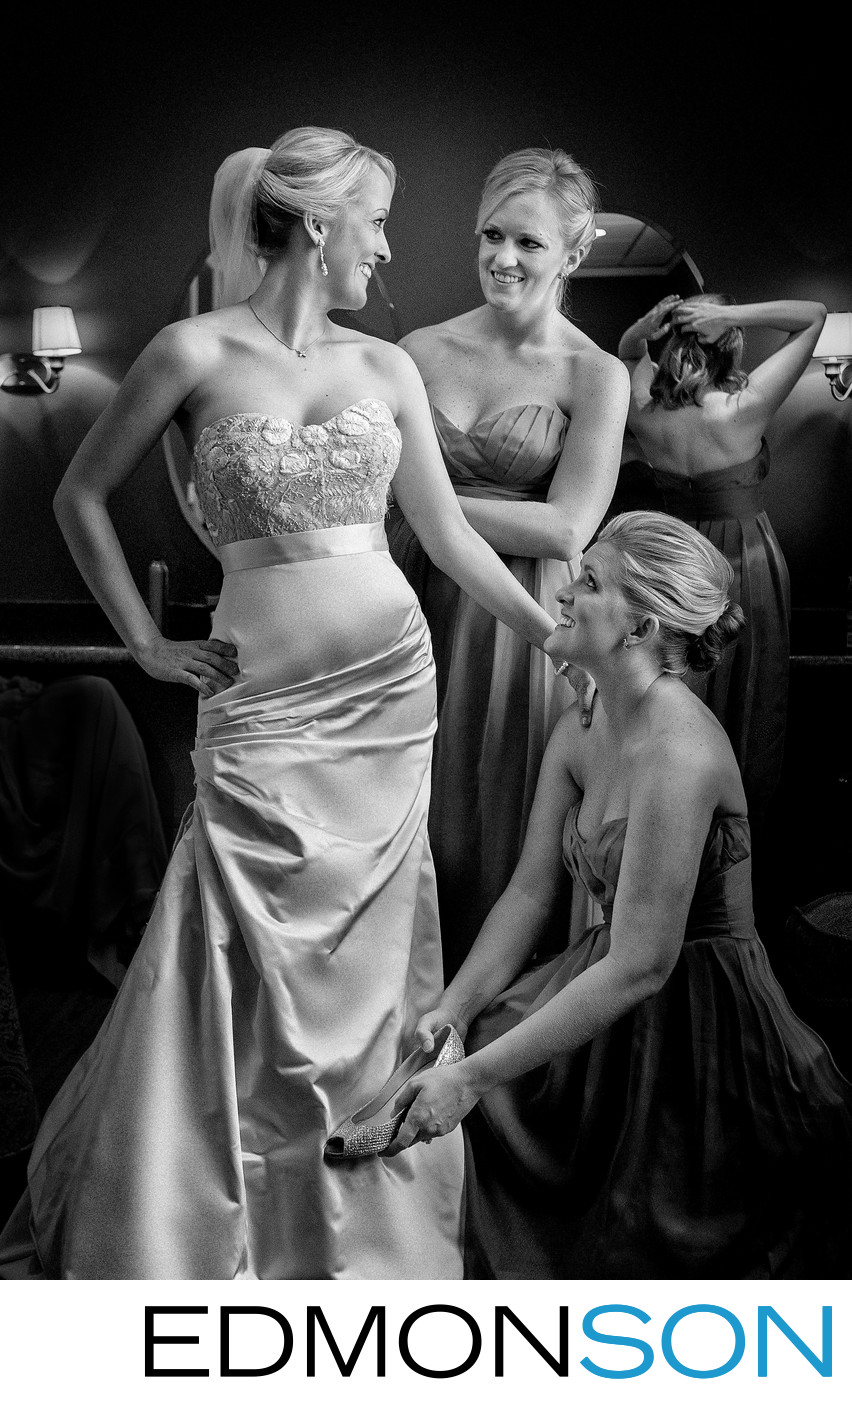 Bridesmaids Help Bride Finishing Touches On Wedding Day